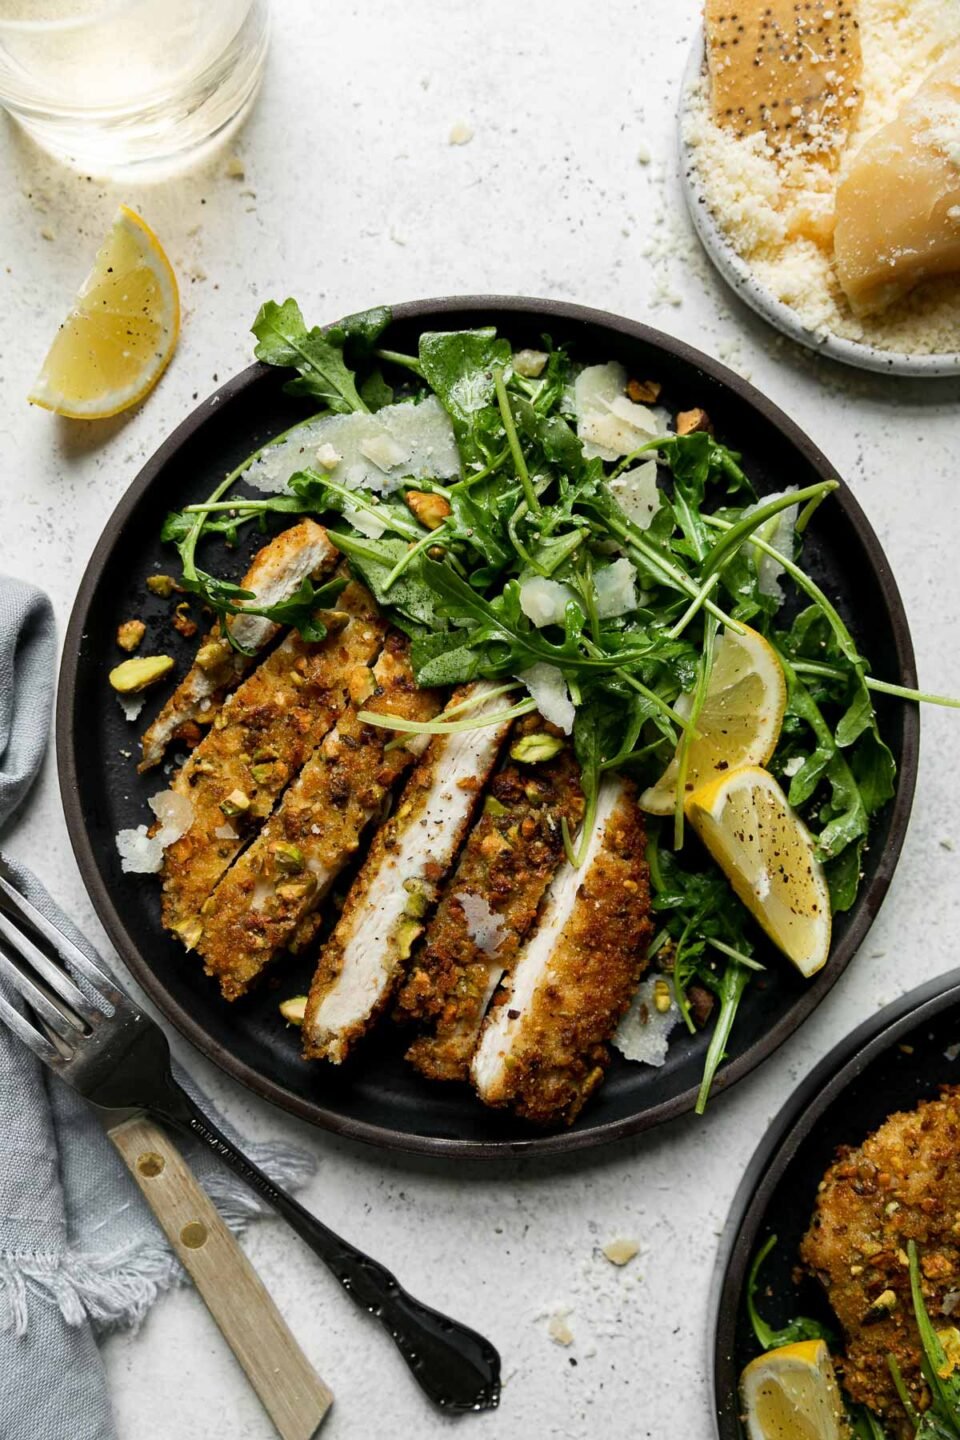 A serving of parmesan pistachio crusted chicken has been sliced and plated on a black ceramic dinner plate alongside a mixed greens salad dressed with more pistachios and parmesan and a light oil dressing. Two lemon wedges sit atop the salad. A silver fork and knife with a wooden handle, a clear glass filled with white wine, a small ceramic plate filled with whole blocks of Parmigiano Reggiano and grated Parmigiano Reggiano, a single lemon wedge, a light blue linen napkin, and another plate of pistachio chicken surround the plate at center. All items sit atop a creamy white textured surface.